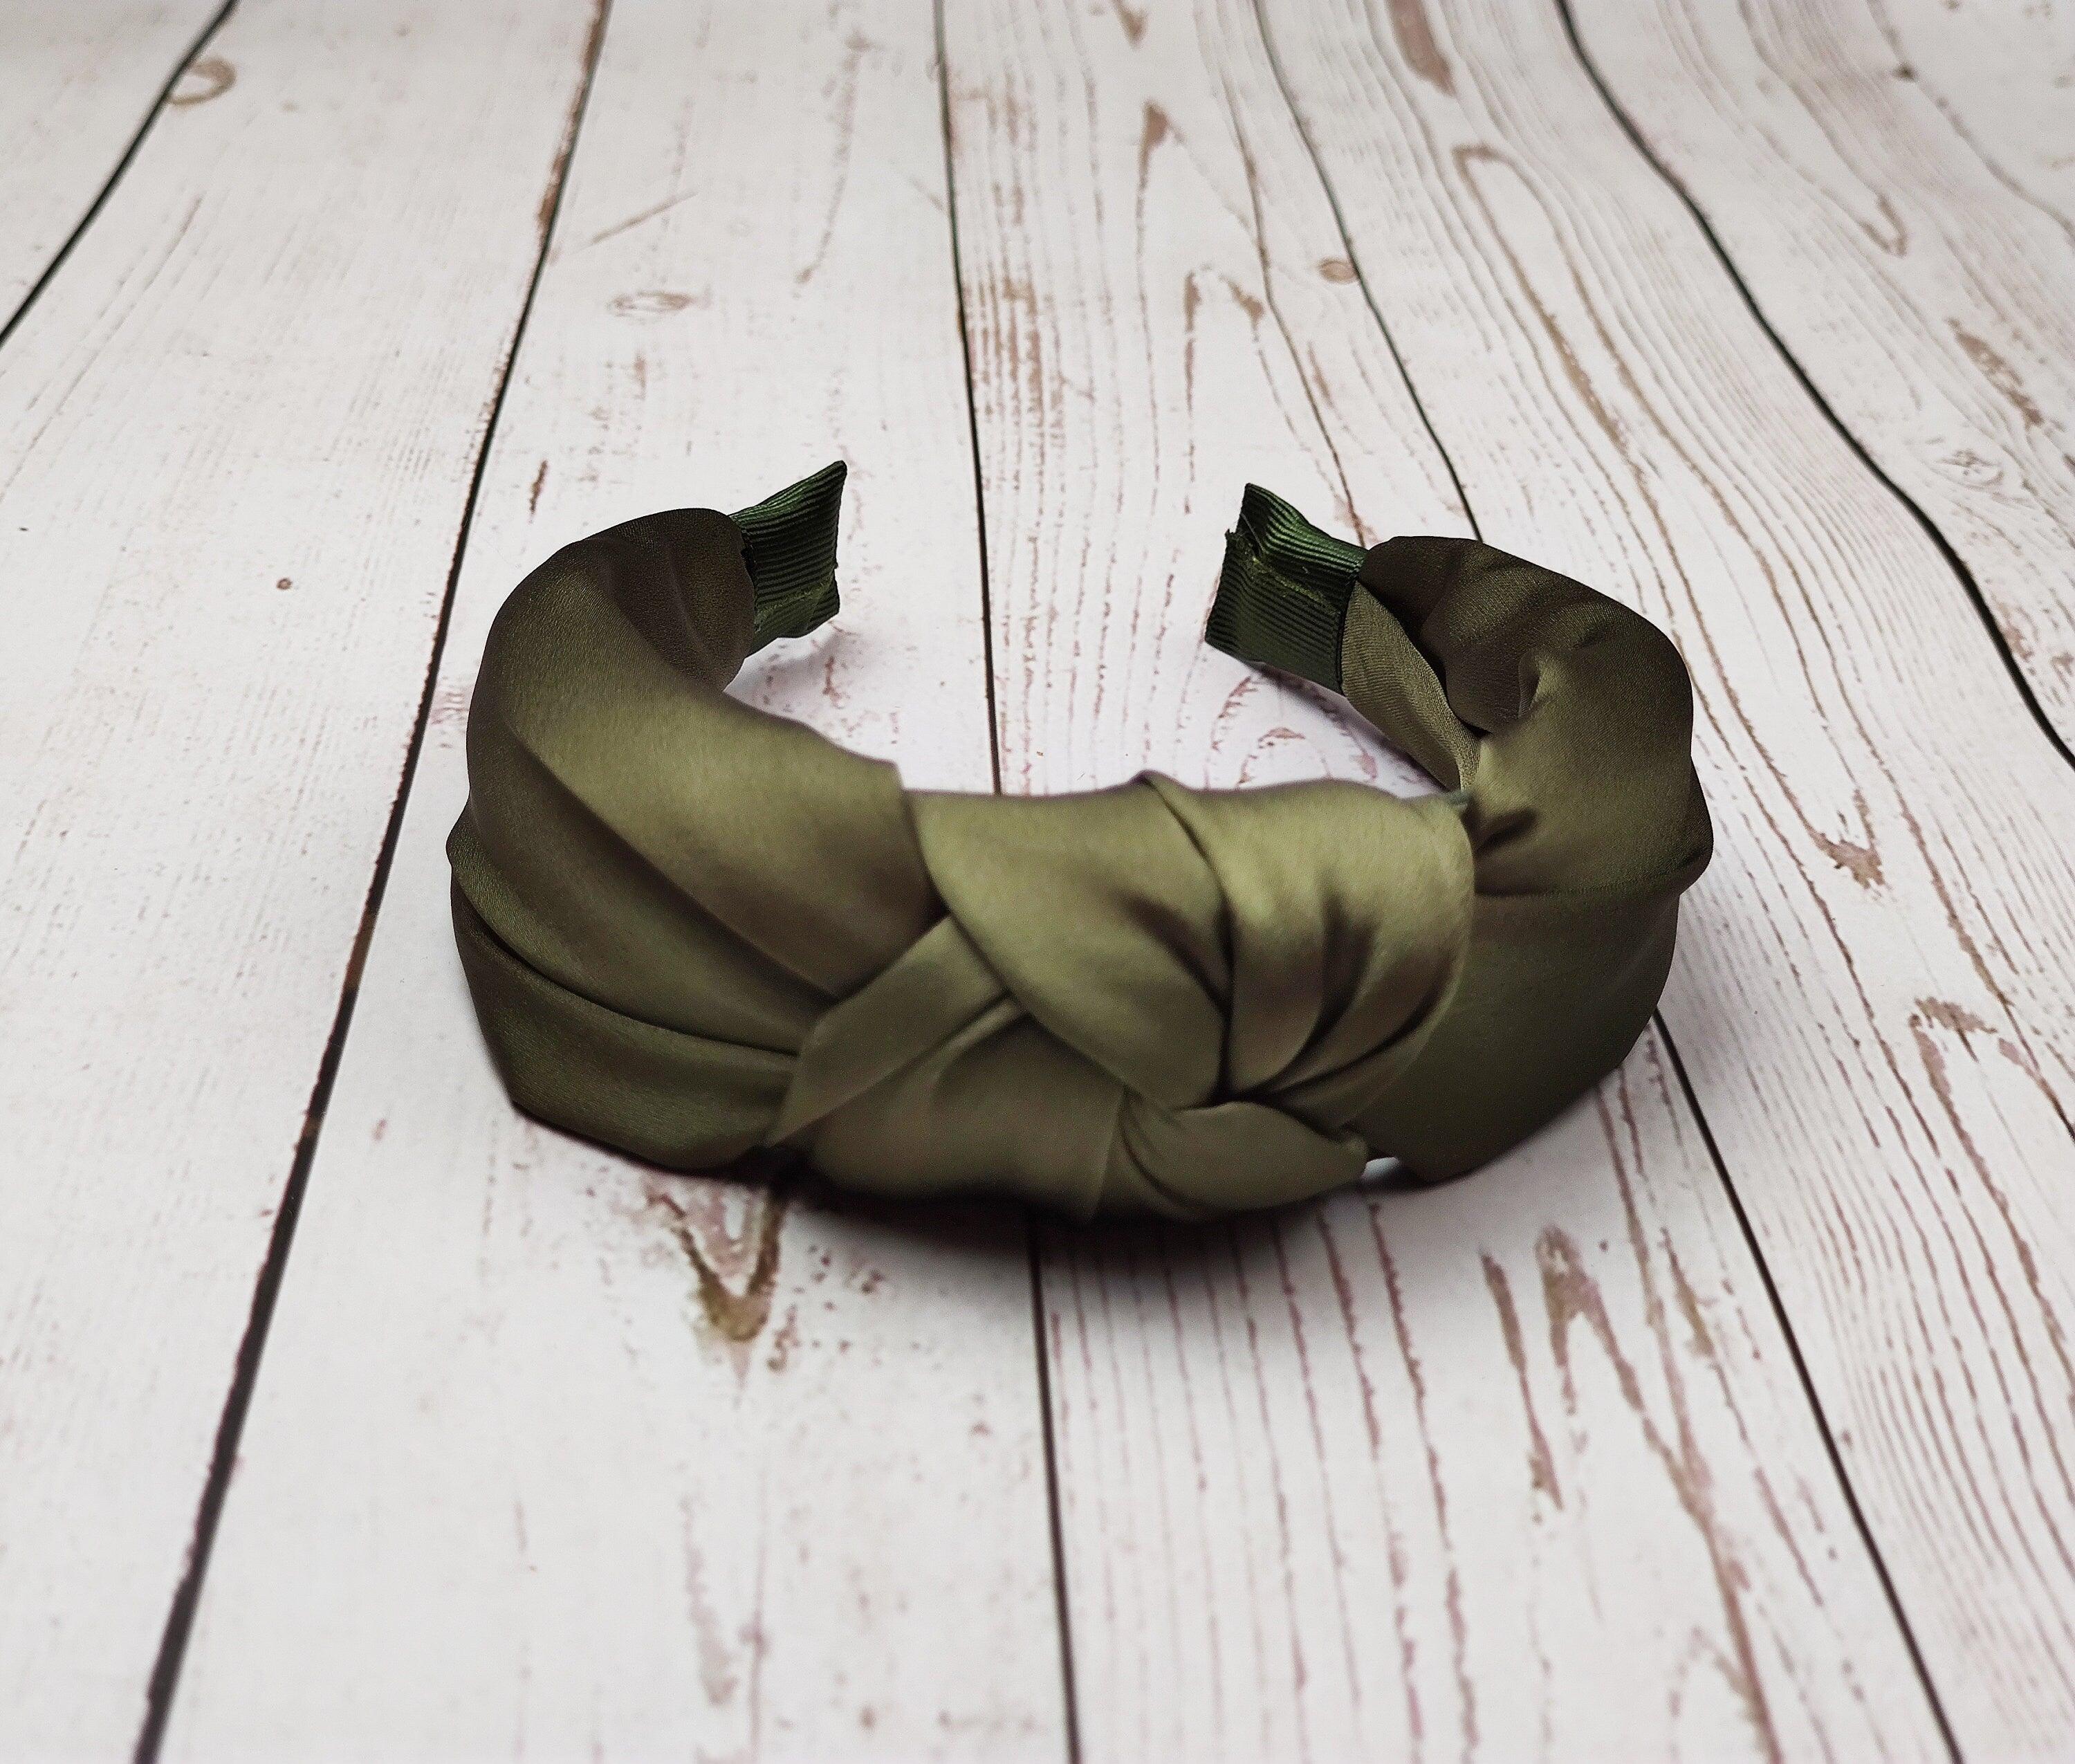 Unique Army Green Satin Knotted Headband - Stylish Women's Twist Headband in Khaki Green - Wide Padded Hairband for Fashionable Look available at Moyoni Design